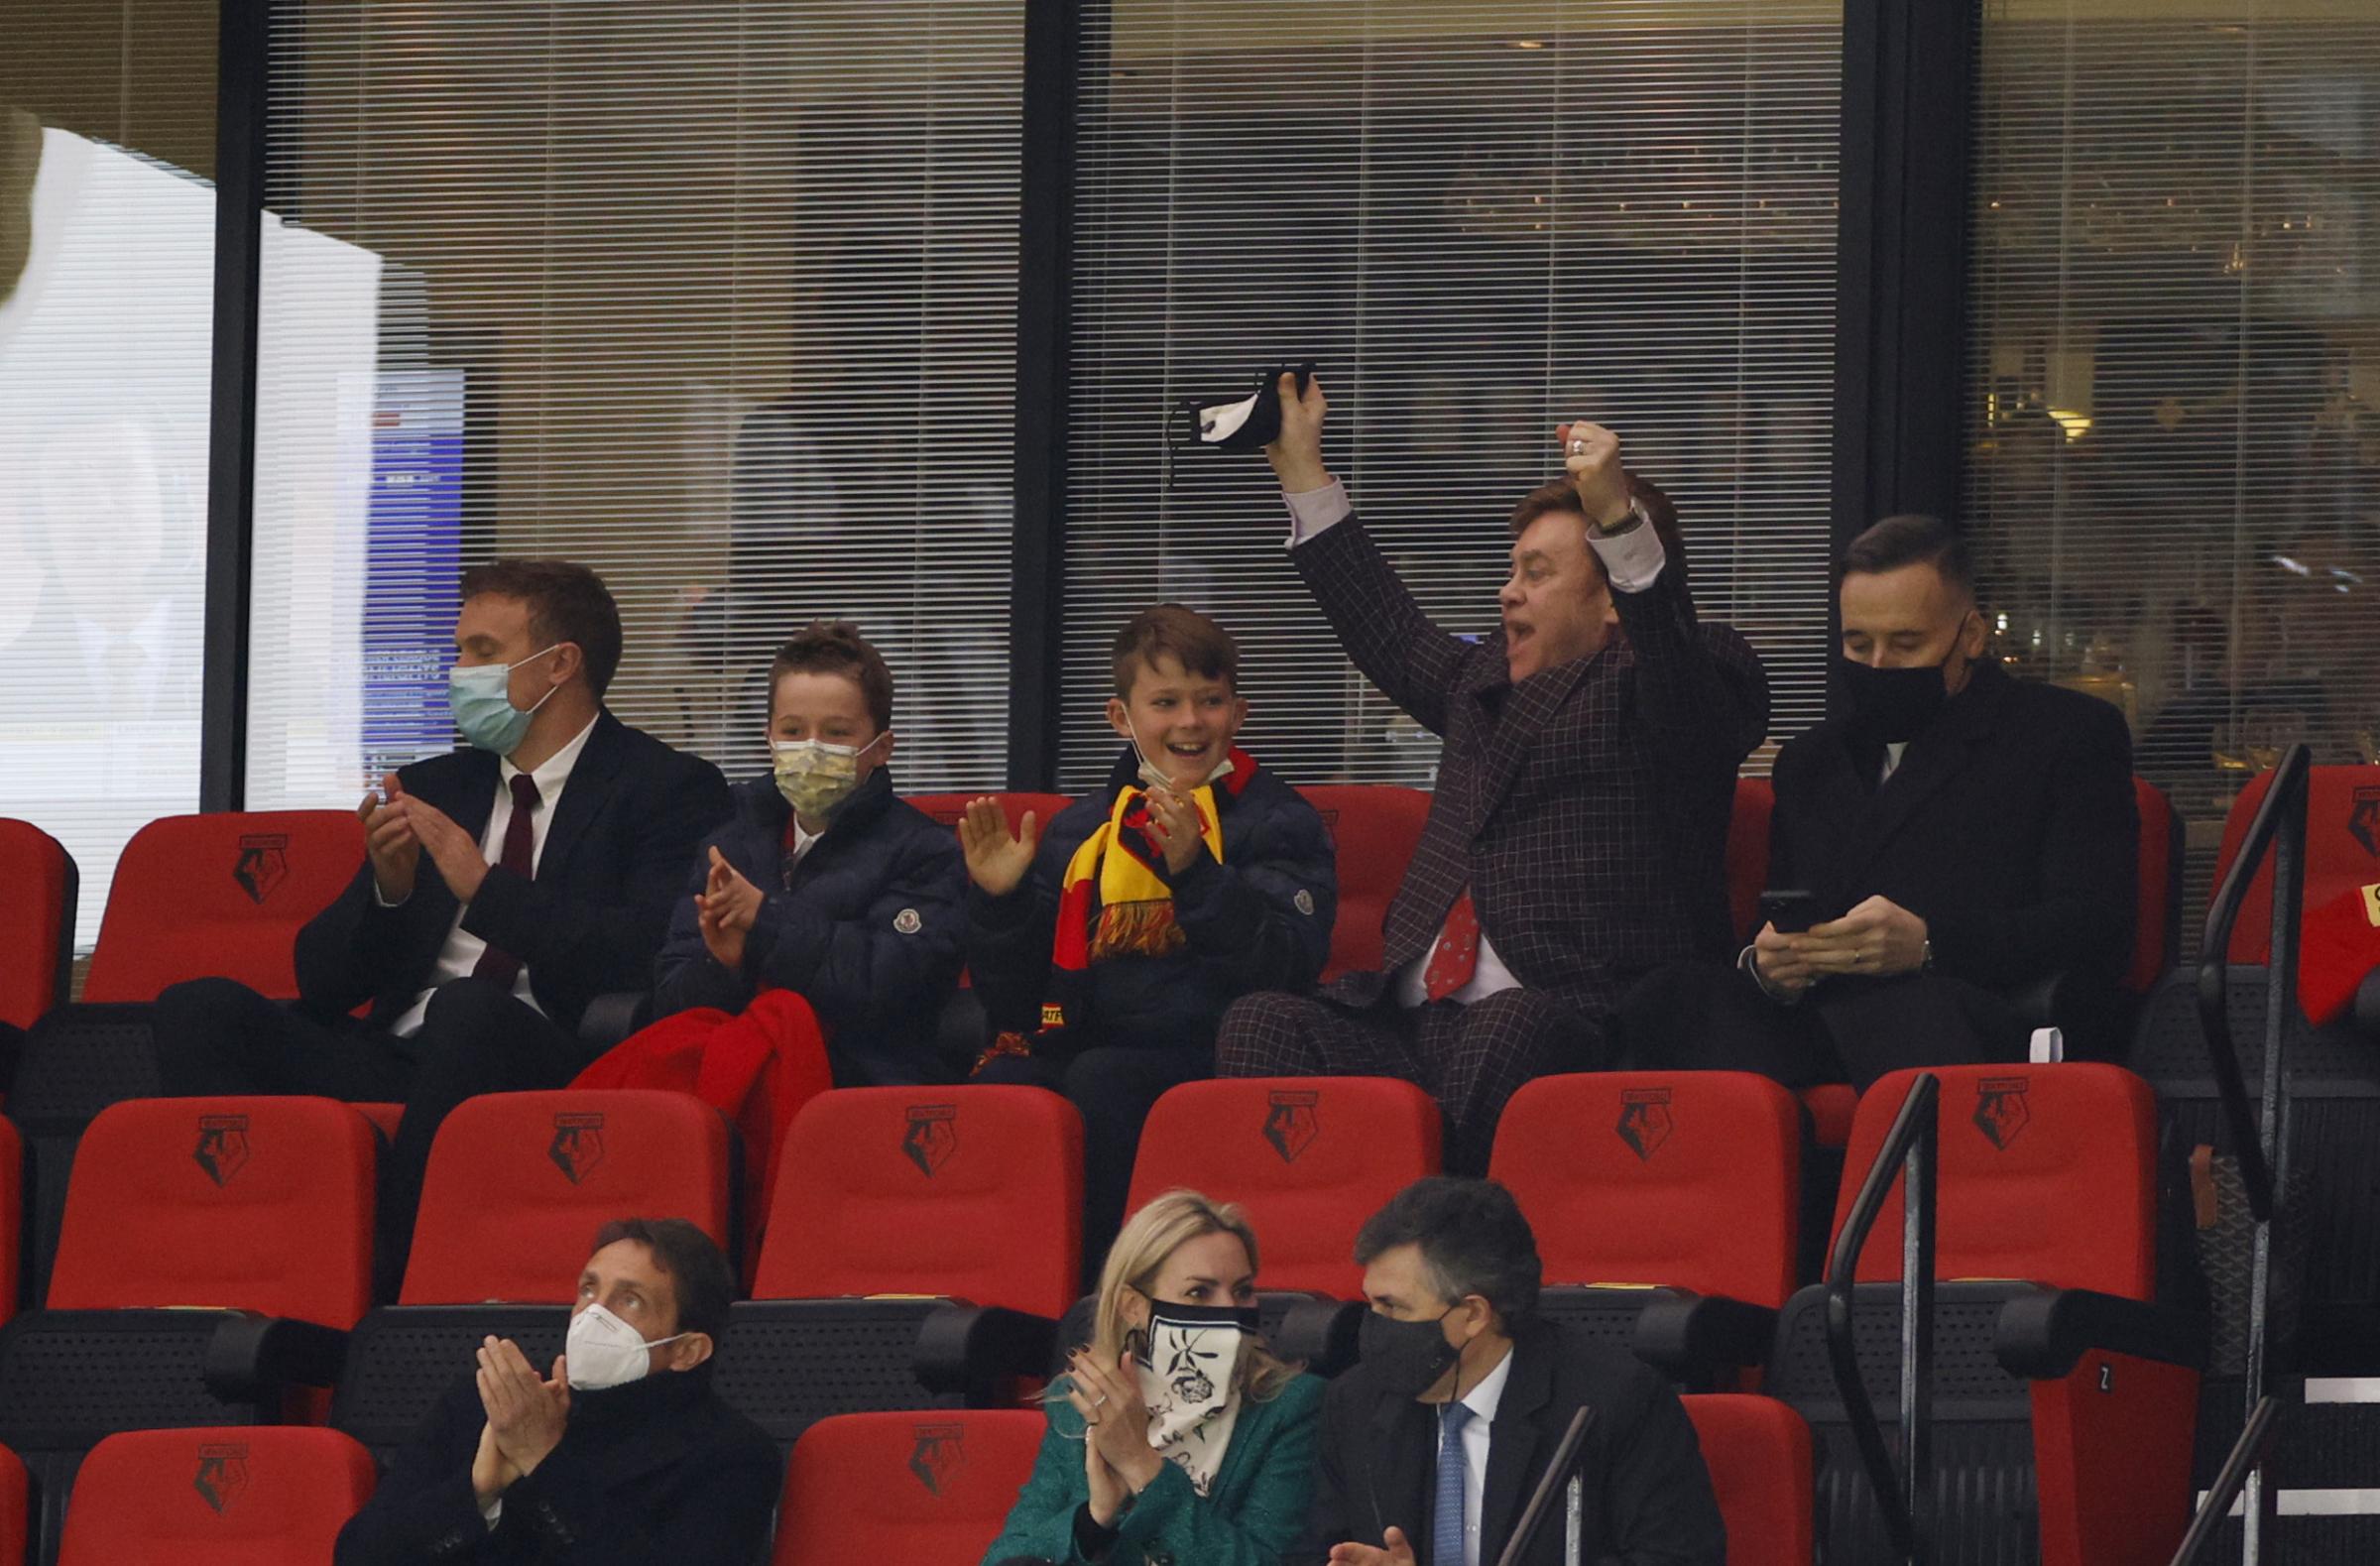 Sir Elton John celebrates Watford’s first goal from the directors box. Photo: Action Images